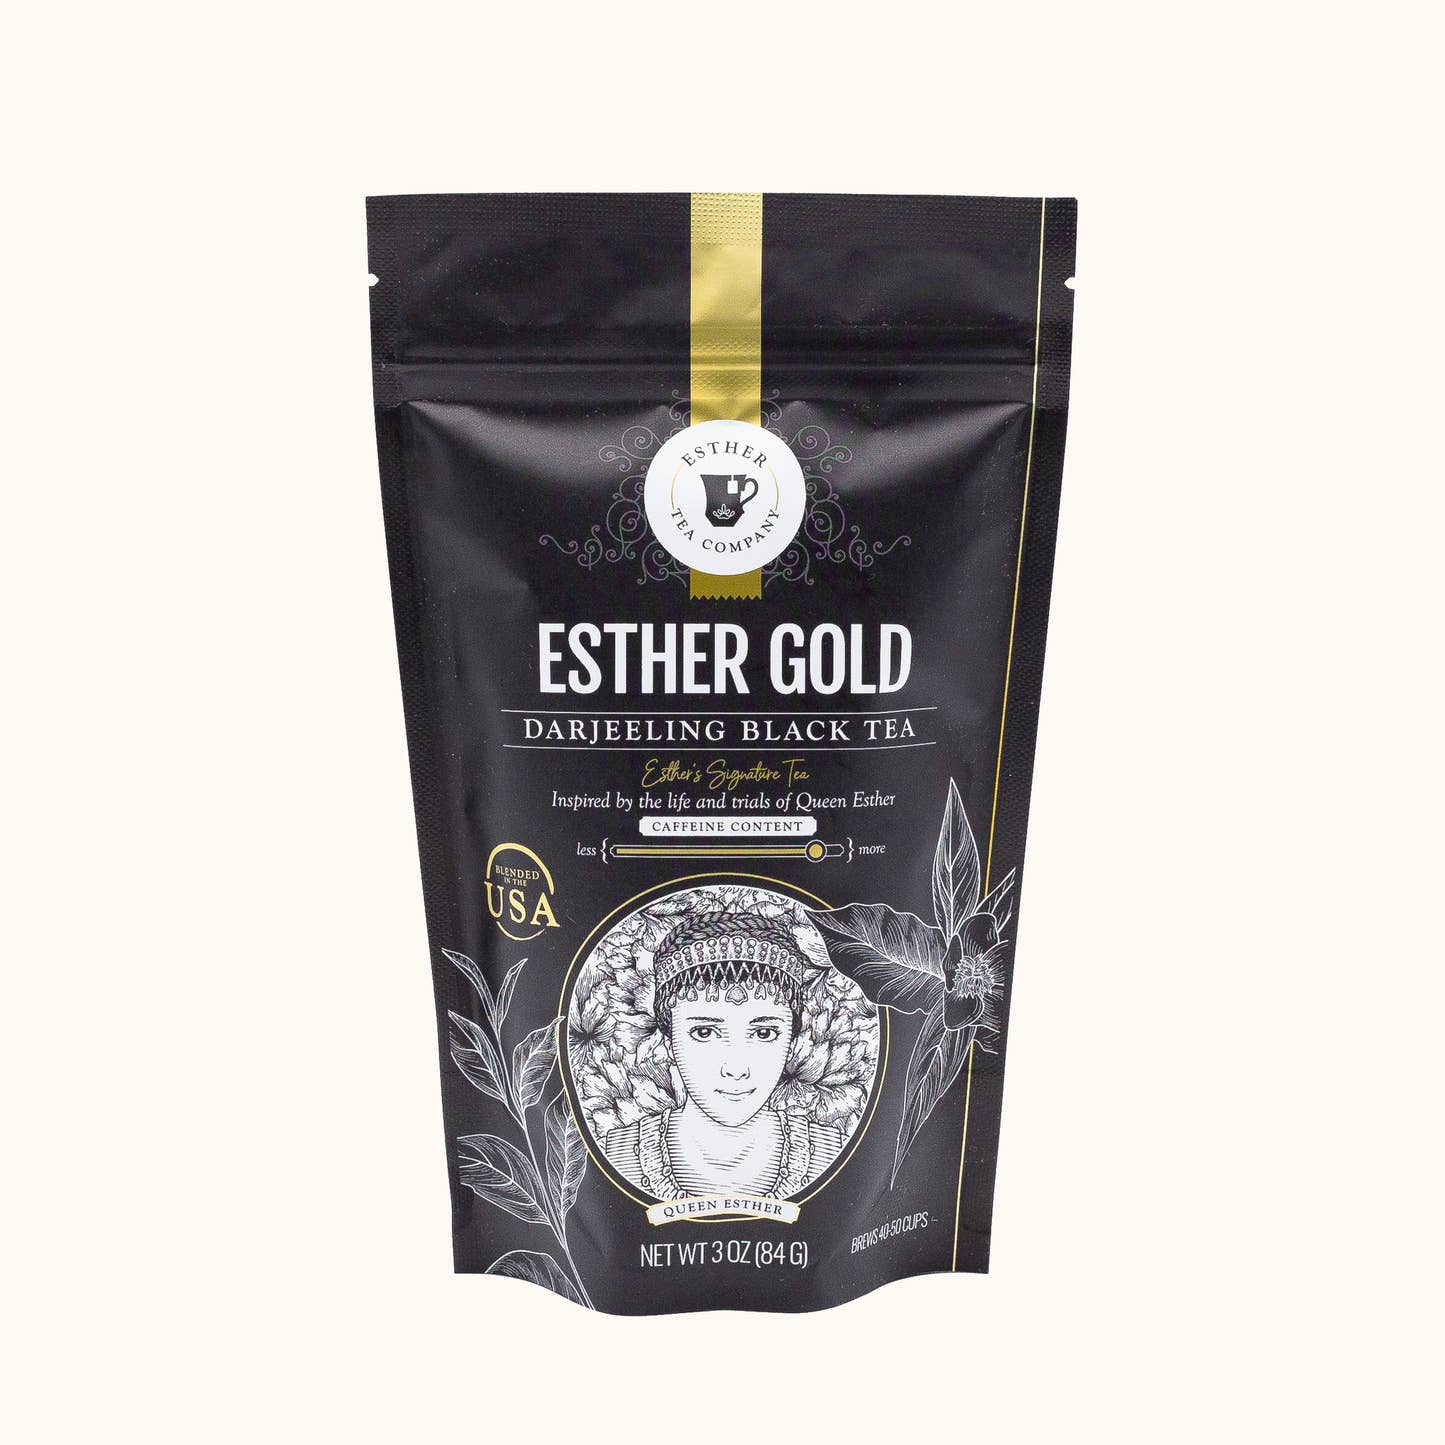 Esther Gold loose leaf tea pouch by Esther Tea Company